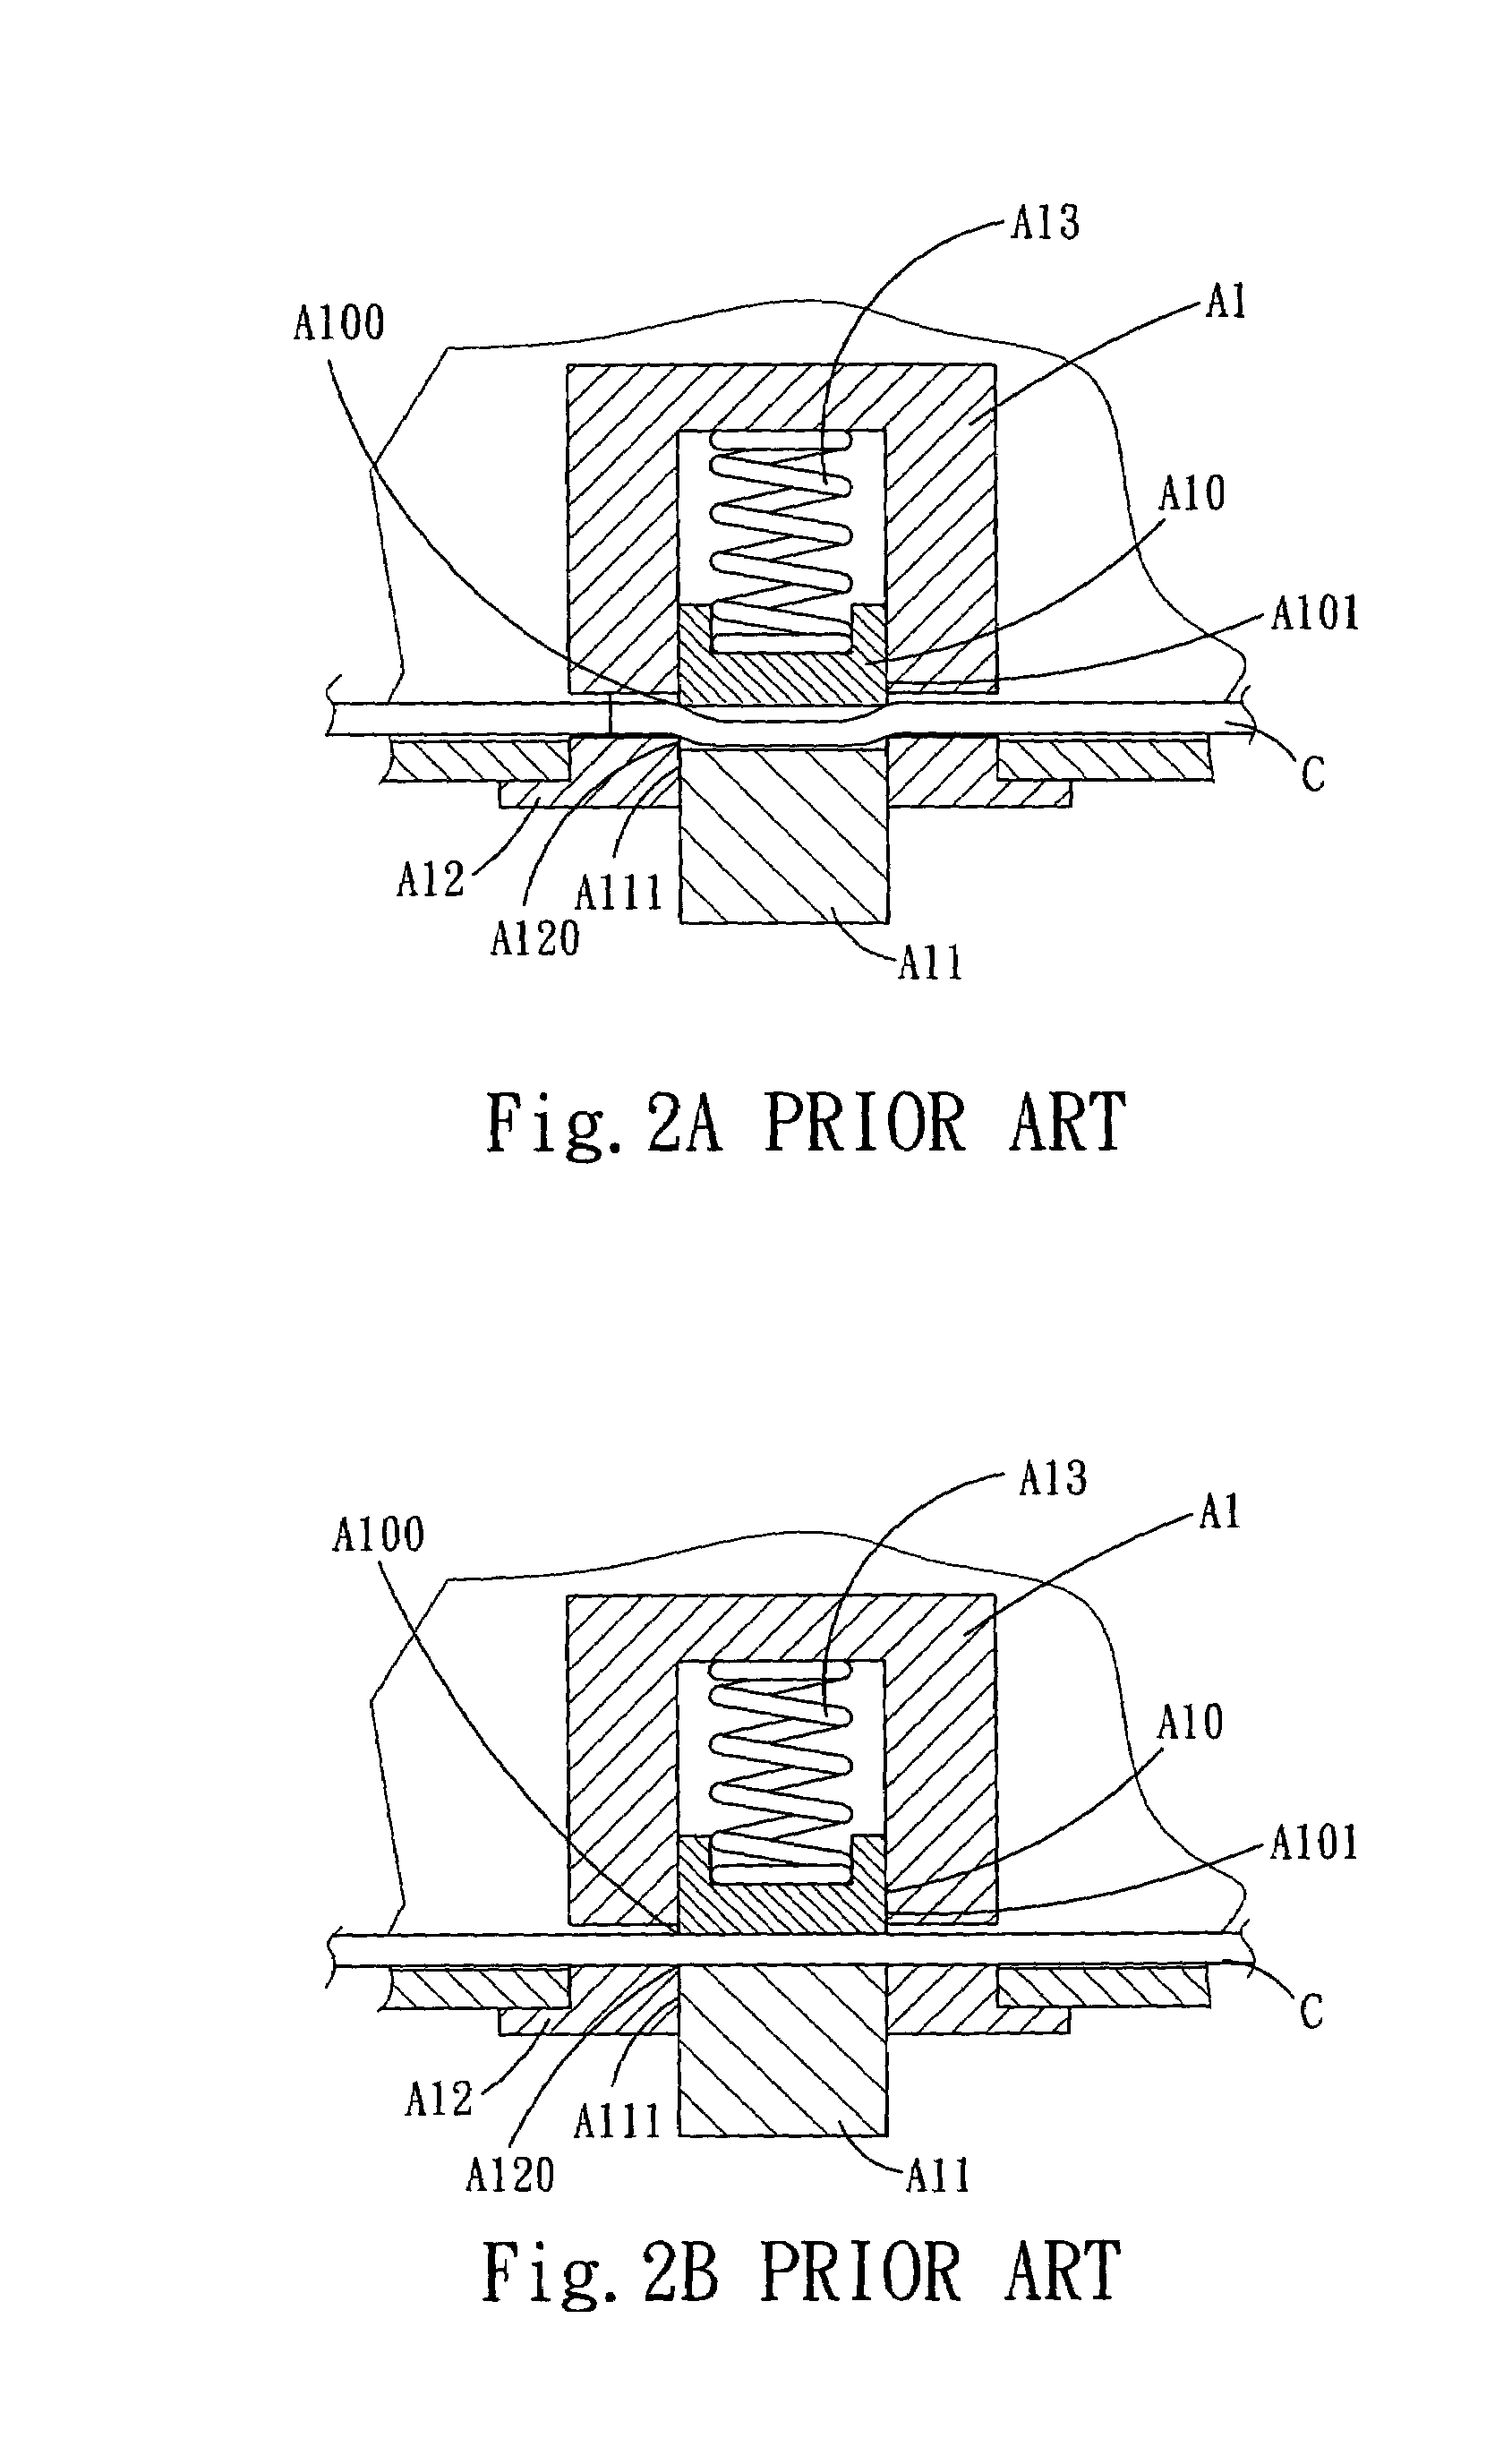 Pulling cord winding apparatus for window shades